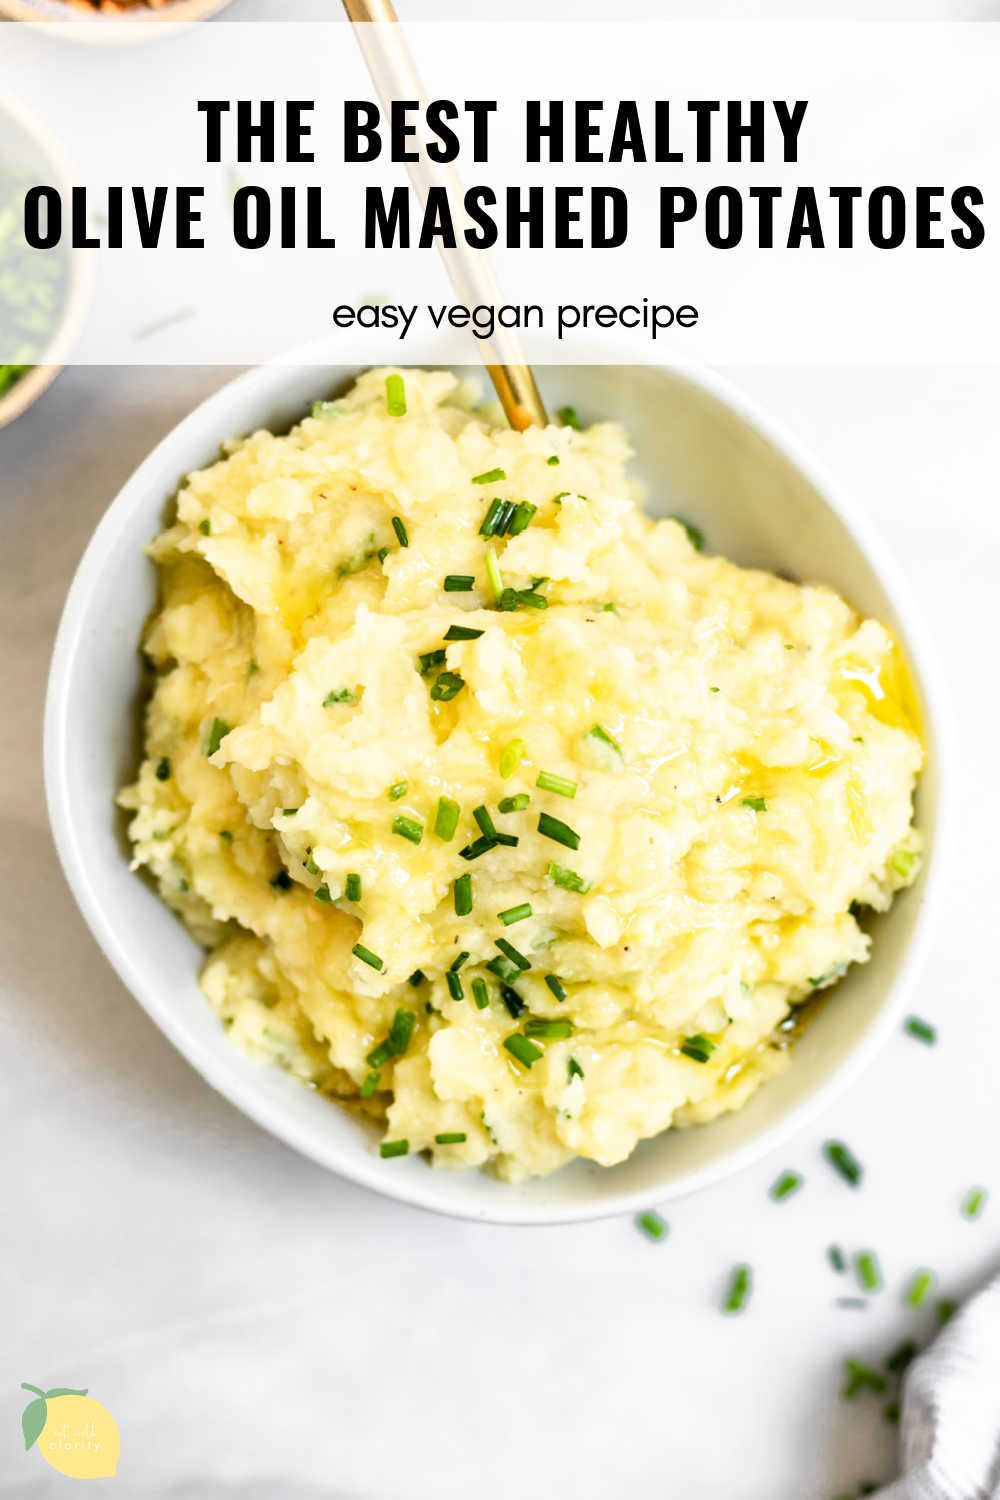 Healthy Vegan Mashed Potatoes | Eat With Clarity